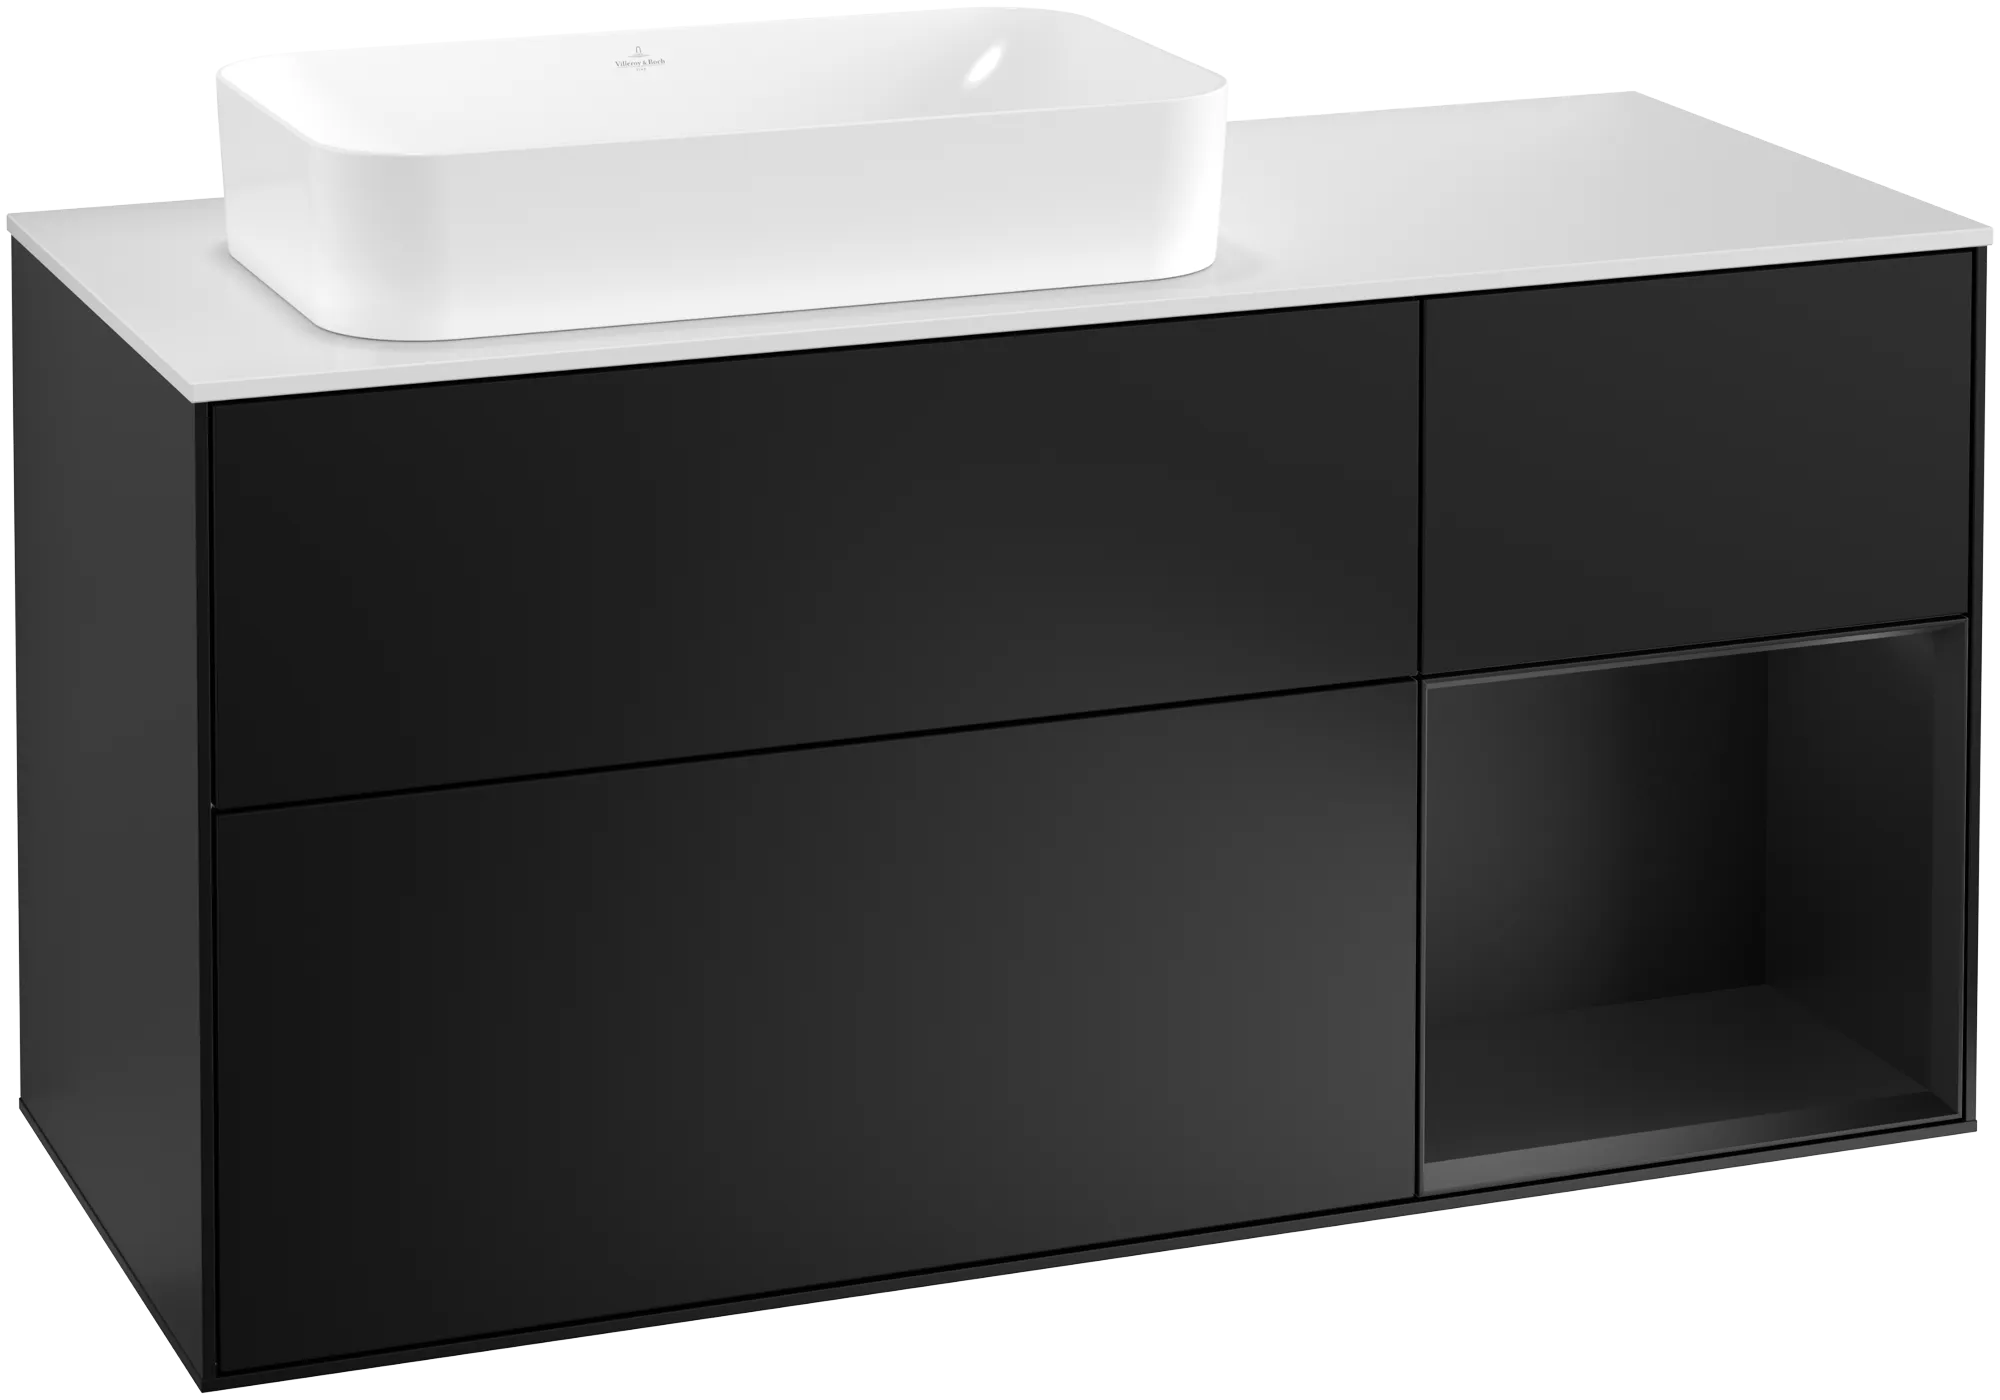 Picture of VILLEROY BOCH Finion Vanity unit, with lighting, 3 pull-out compartments, 1200 x 603 x 501 mm, Black Matt Lacquer / Black Matt Lacquer / Glass White Matt #G281PDPD